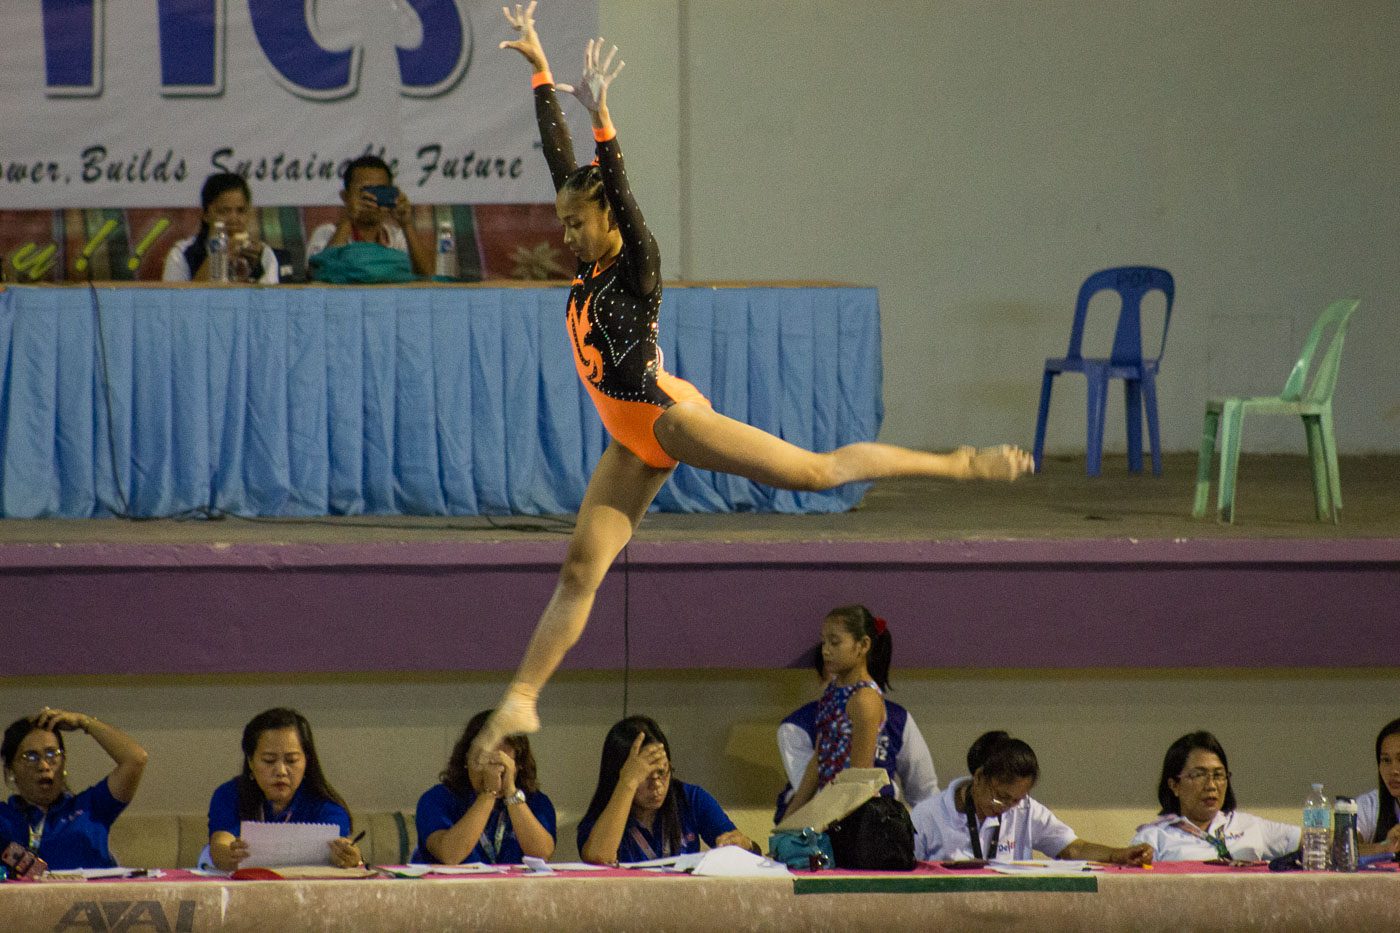 EXTRA FLIGHT. A gymnast performs her stunt in mid-air 